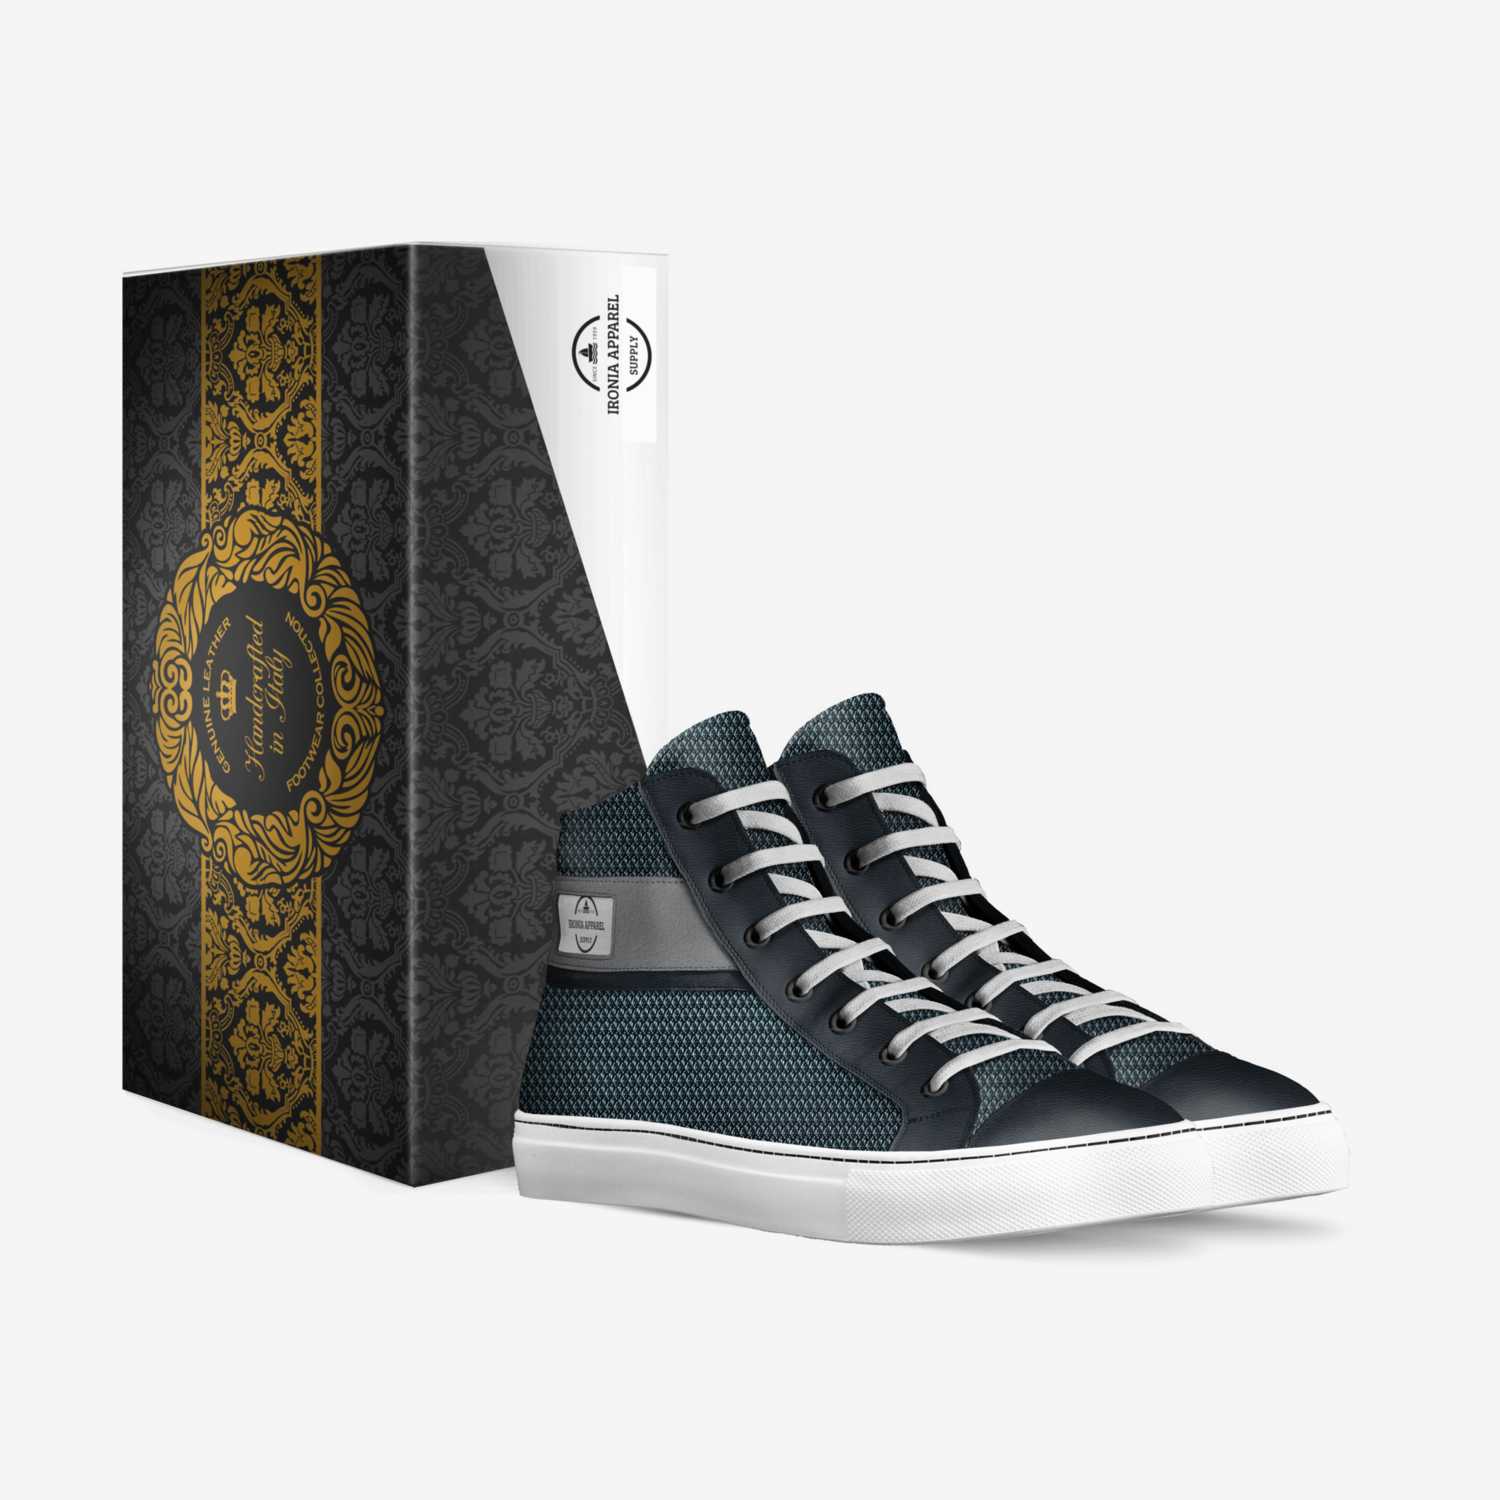 Ironia Apparel custom made in Italy shoes by Dean Blackwell | Box view